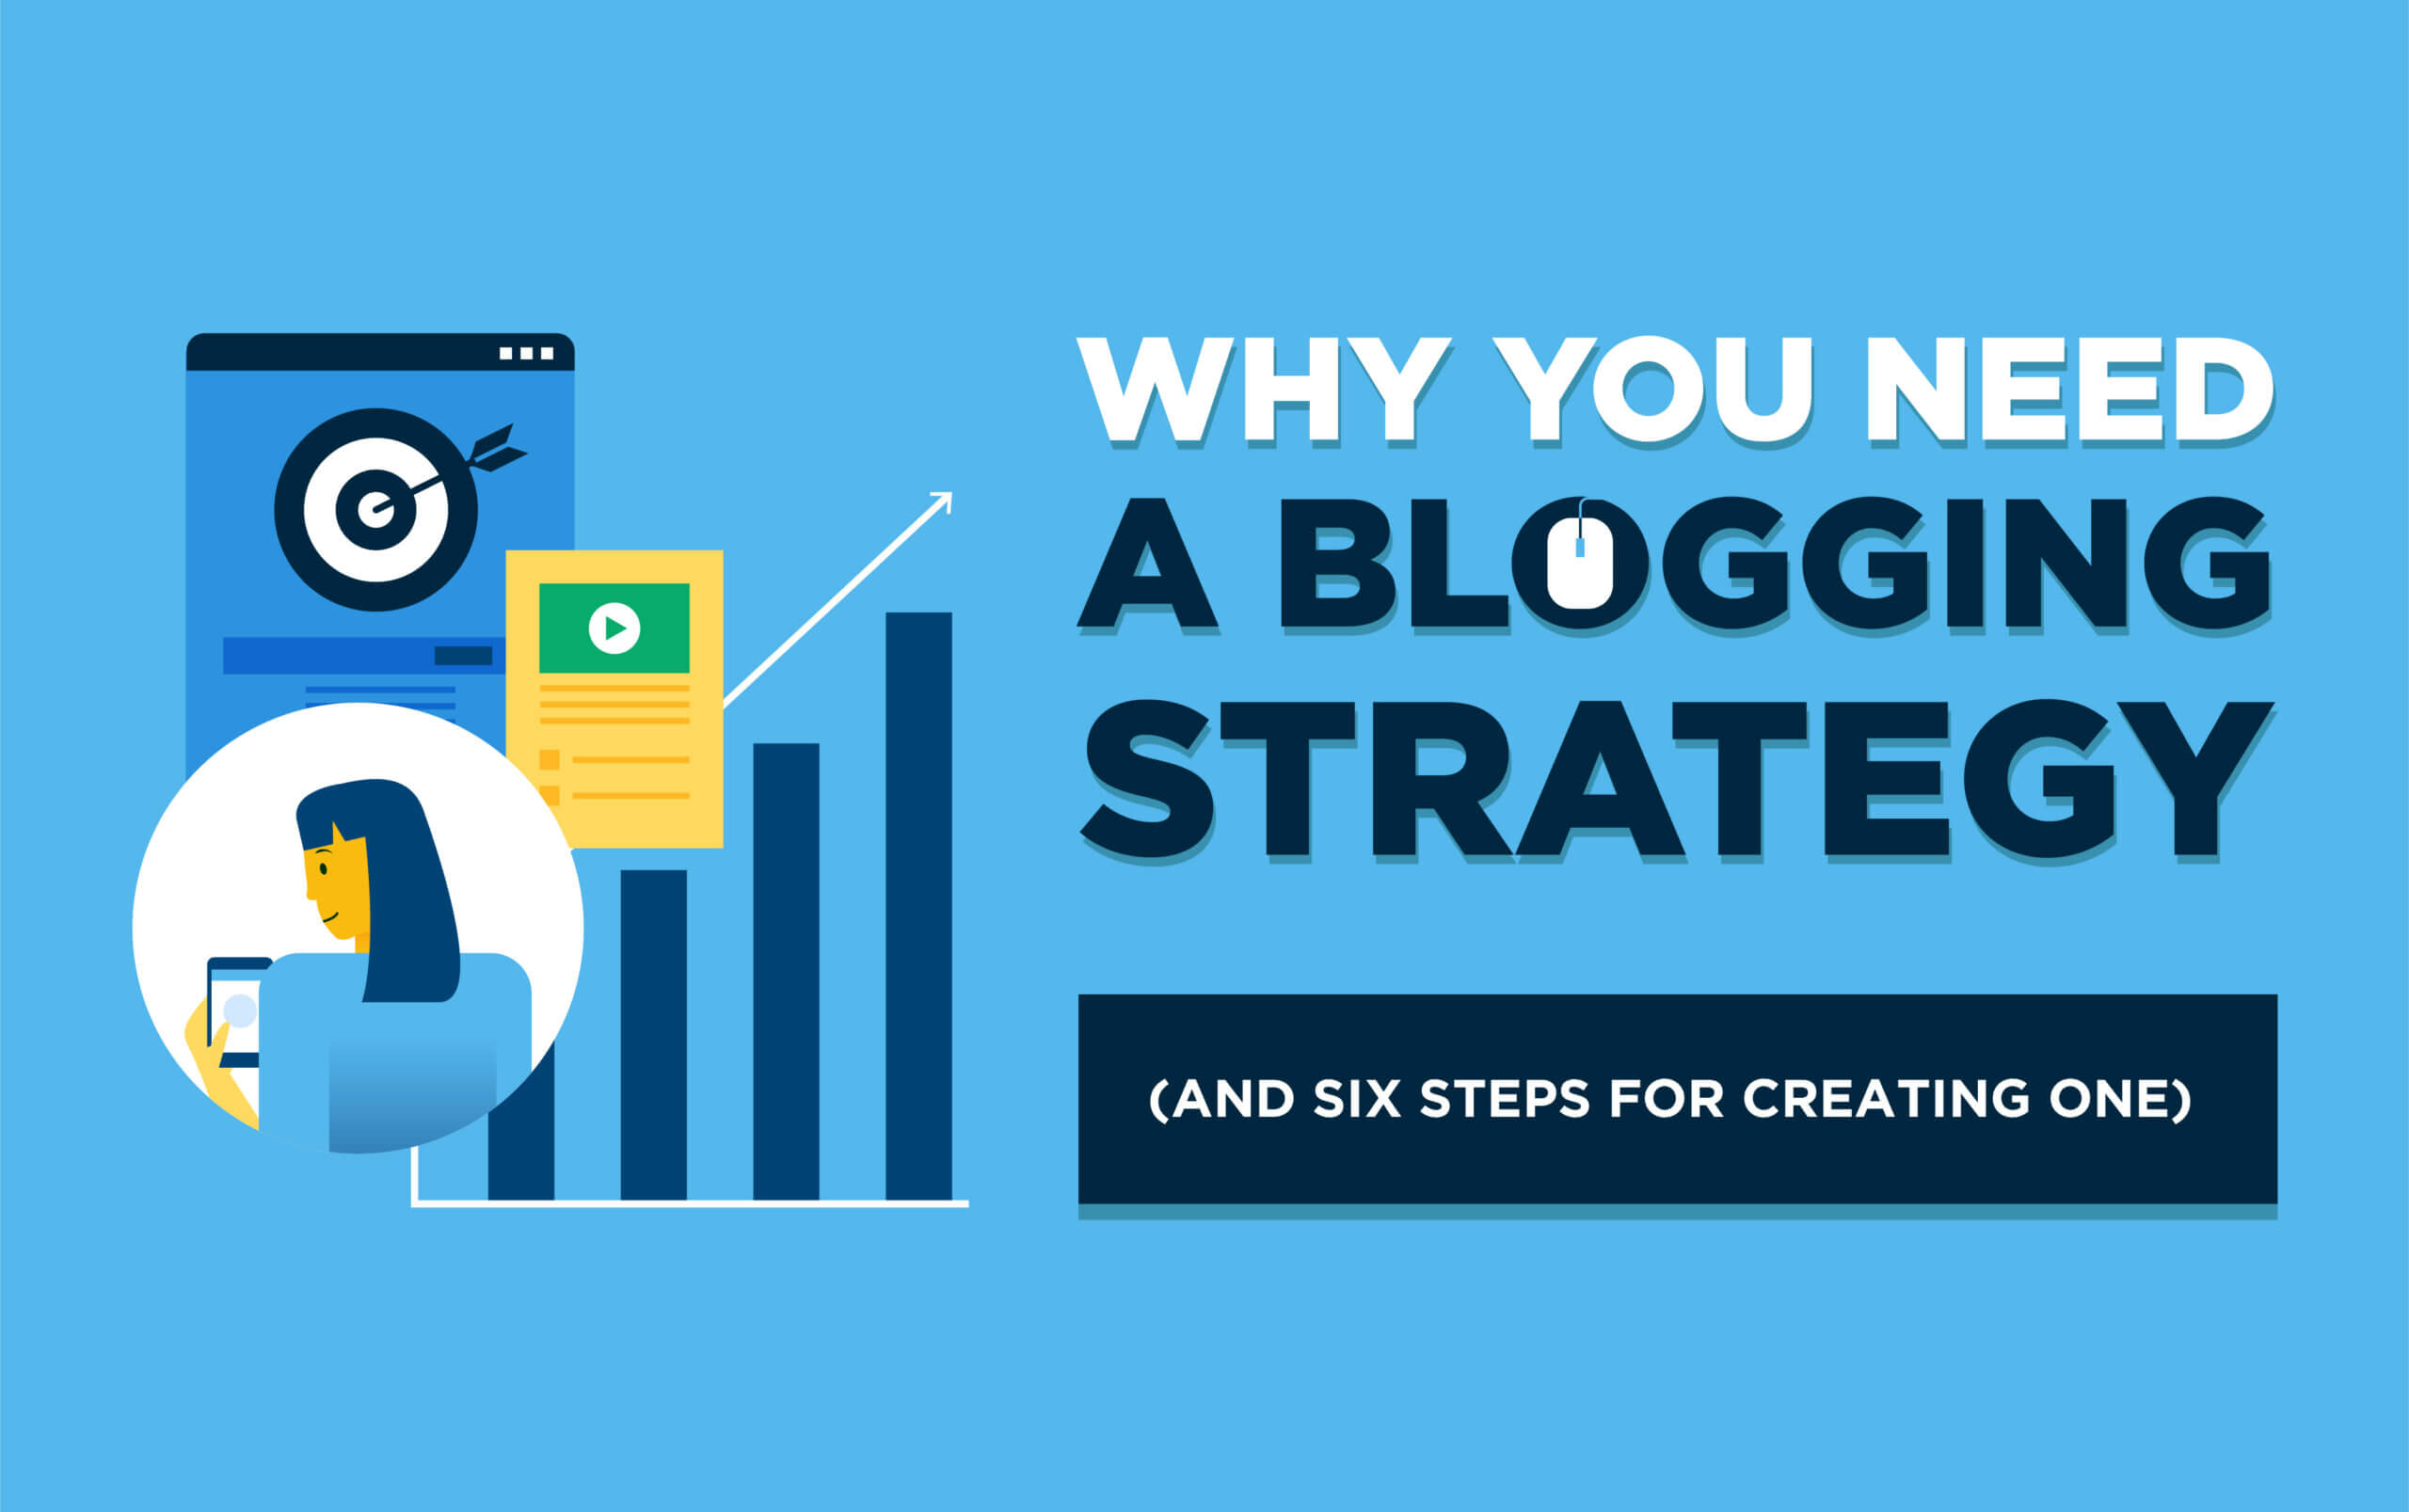 Why You Need a Blog Strategy (and 6 Steps for Creating One) This Year